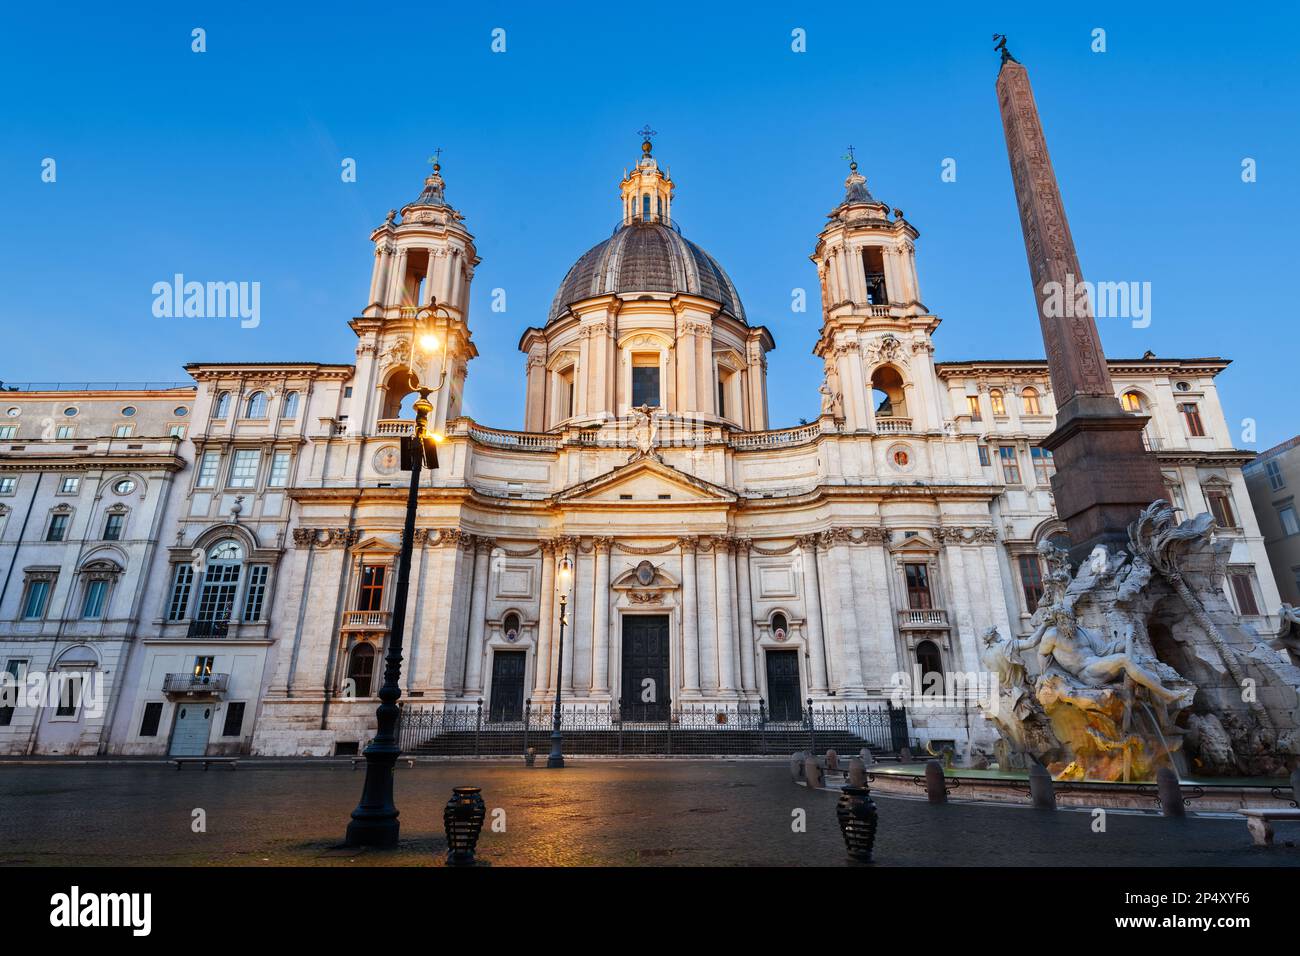 Piazza Navona at the Obelisk and Sant'Agnese in Rome, Italy at twilight. Stock Photo